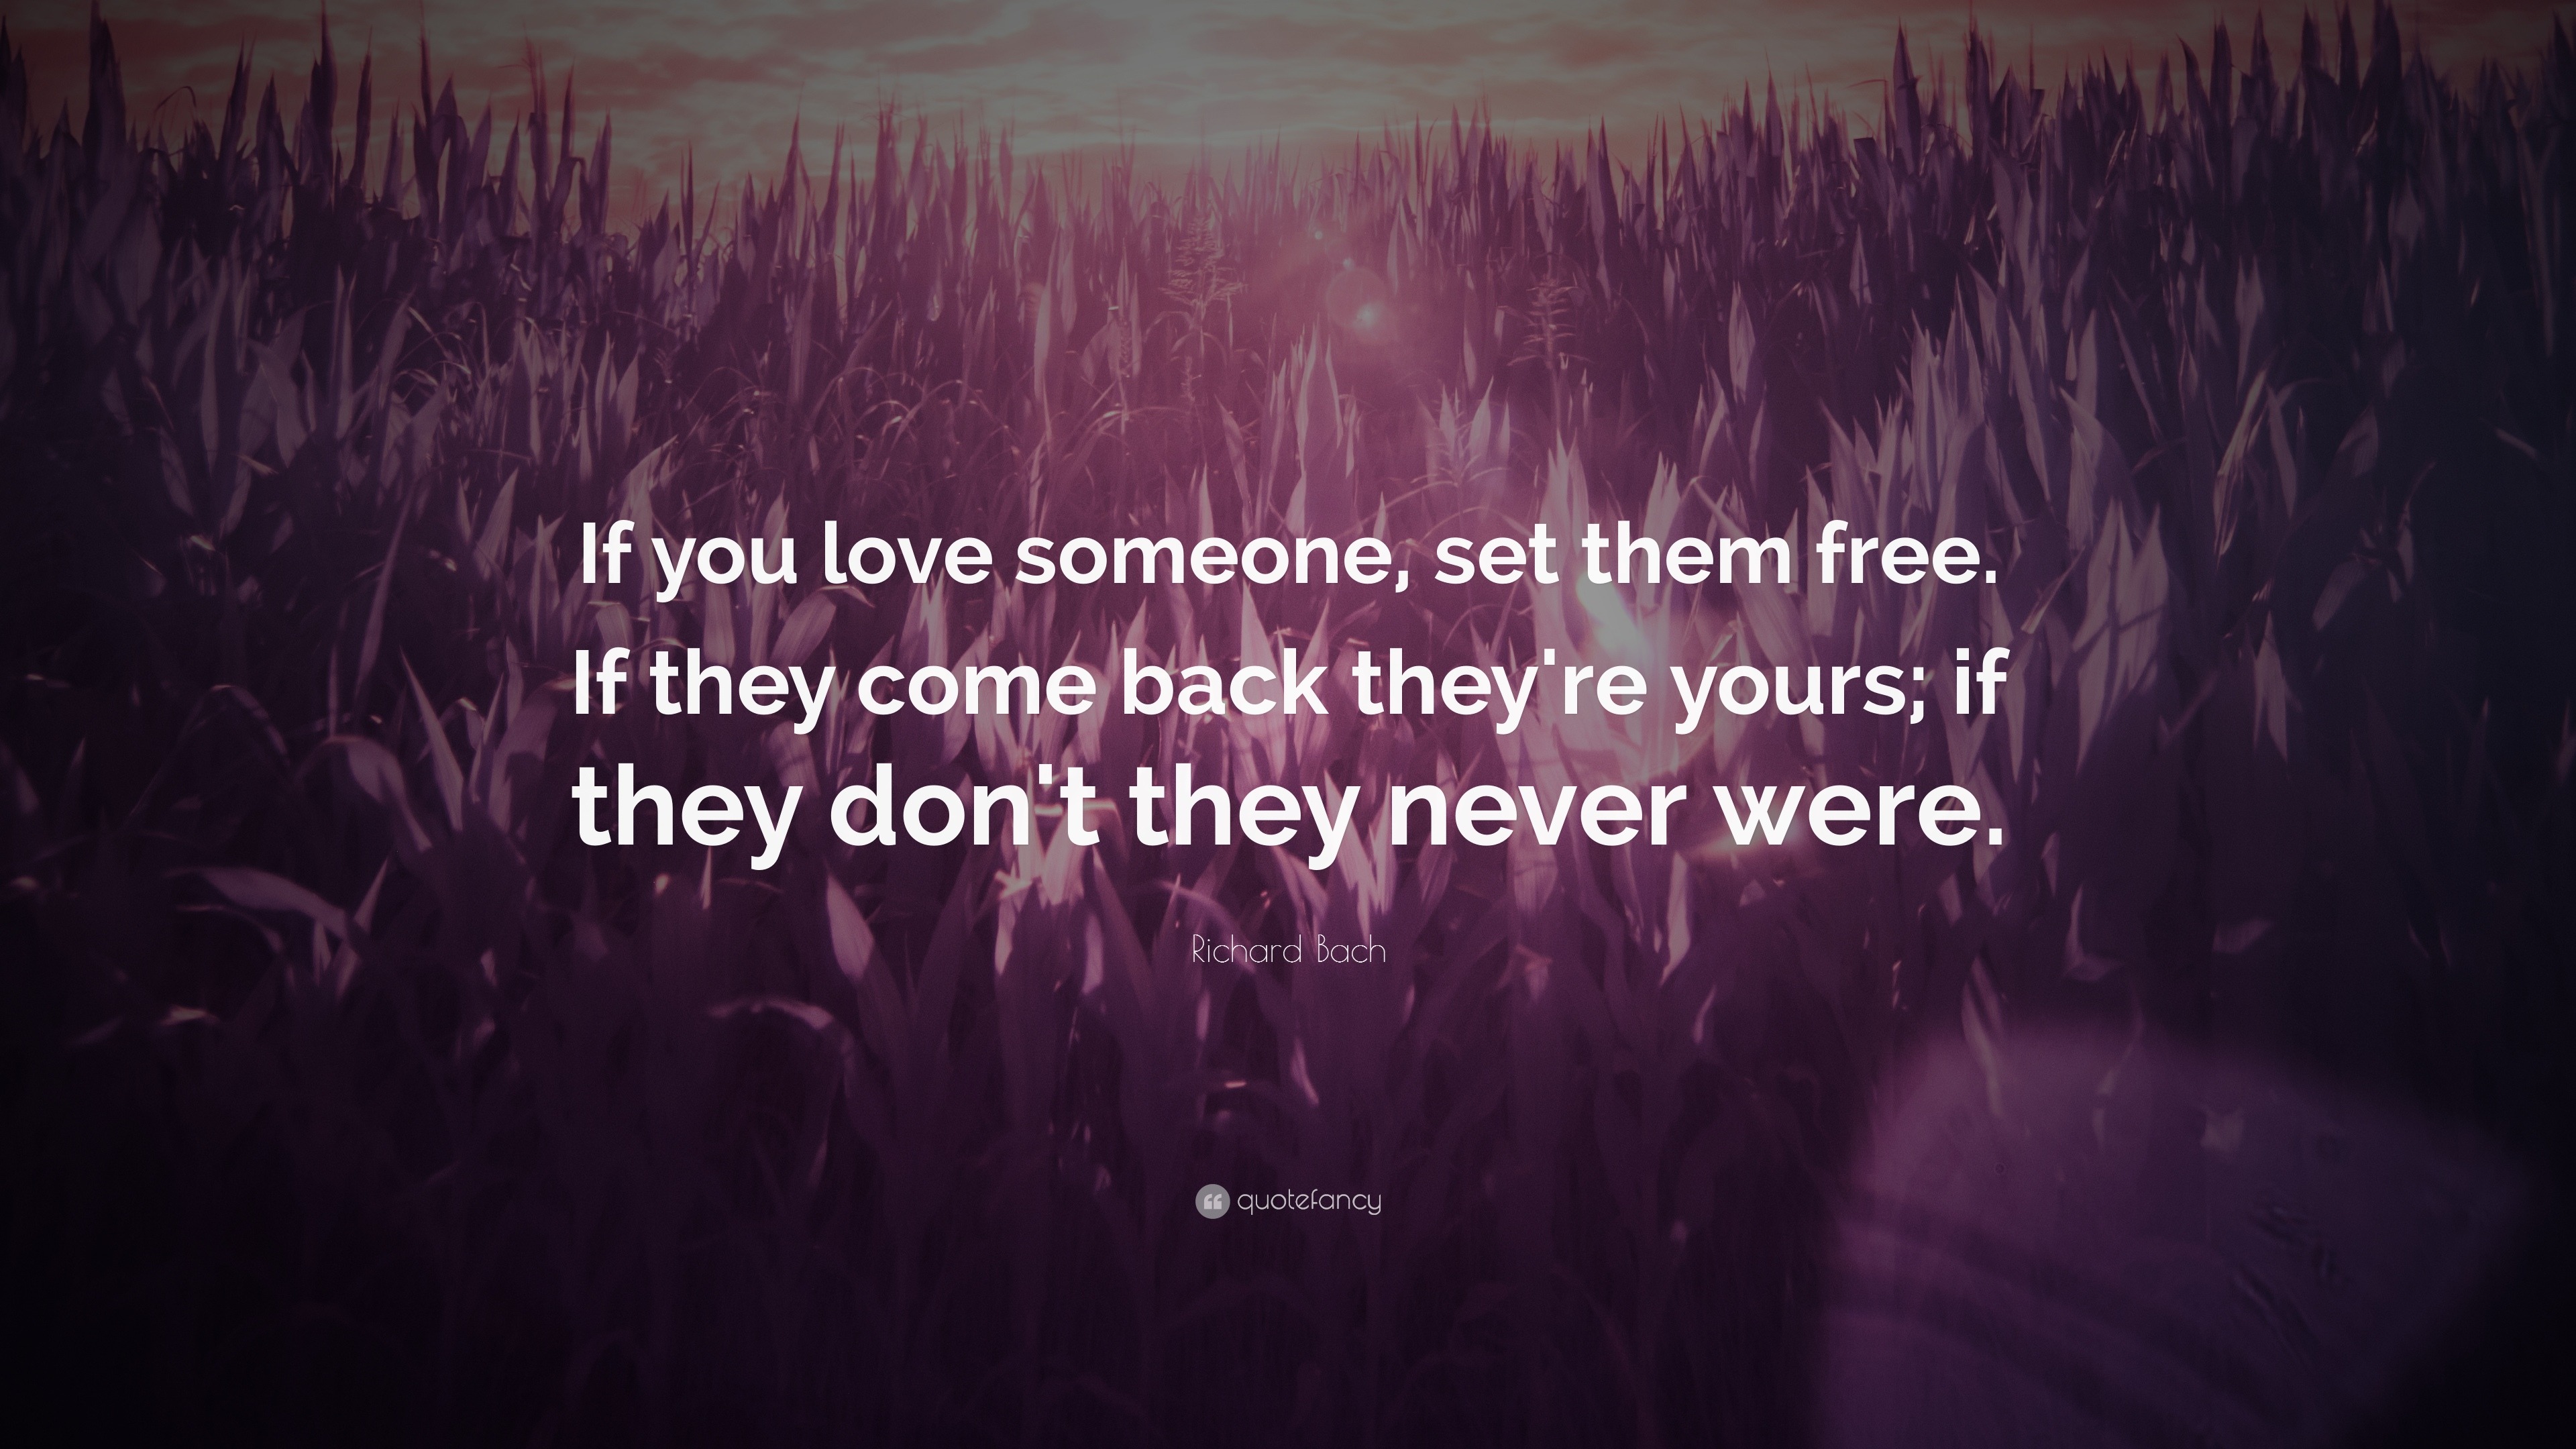 Richard Bach Quote: “If you love someone, set them free. If they come